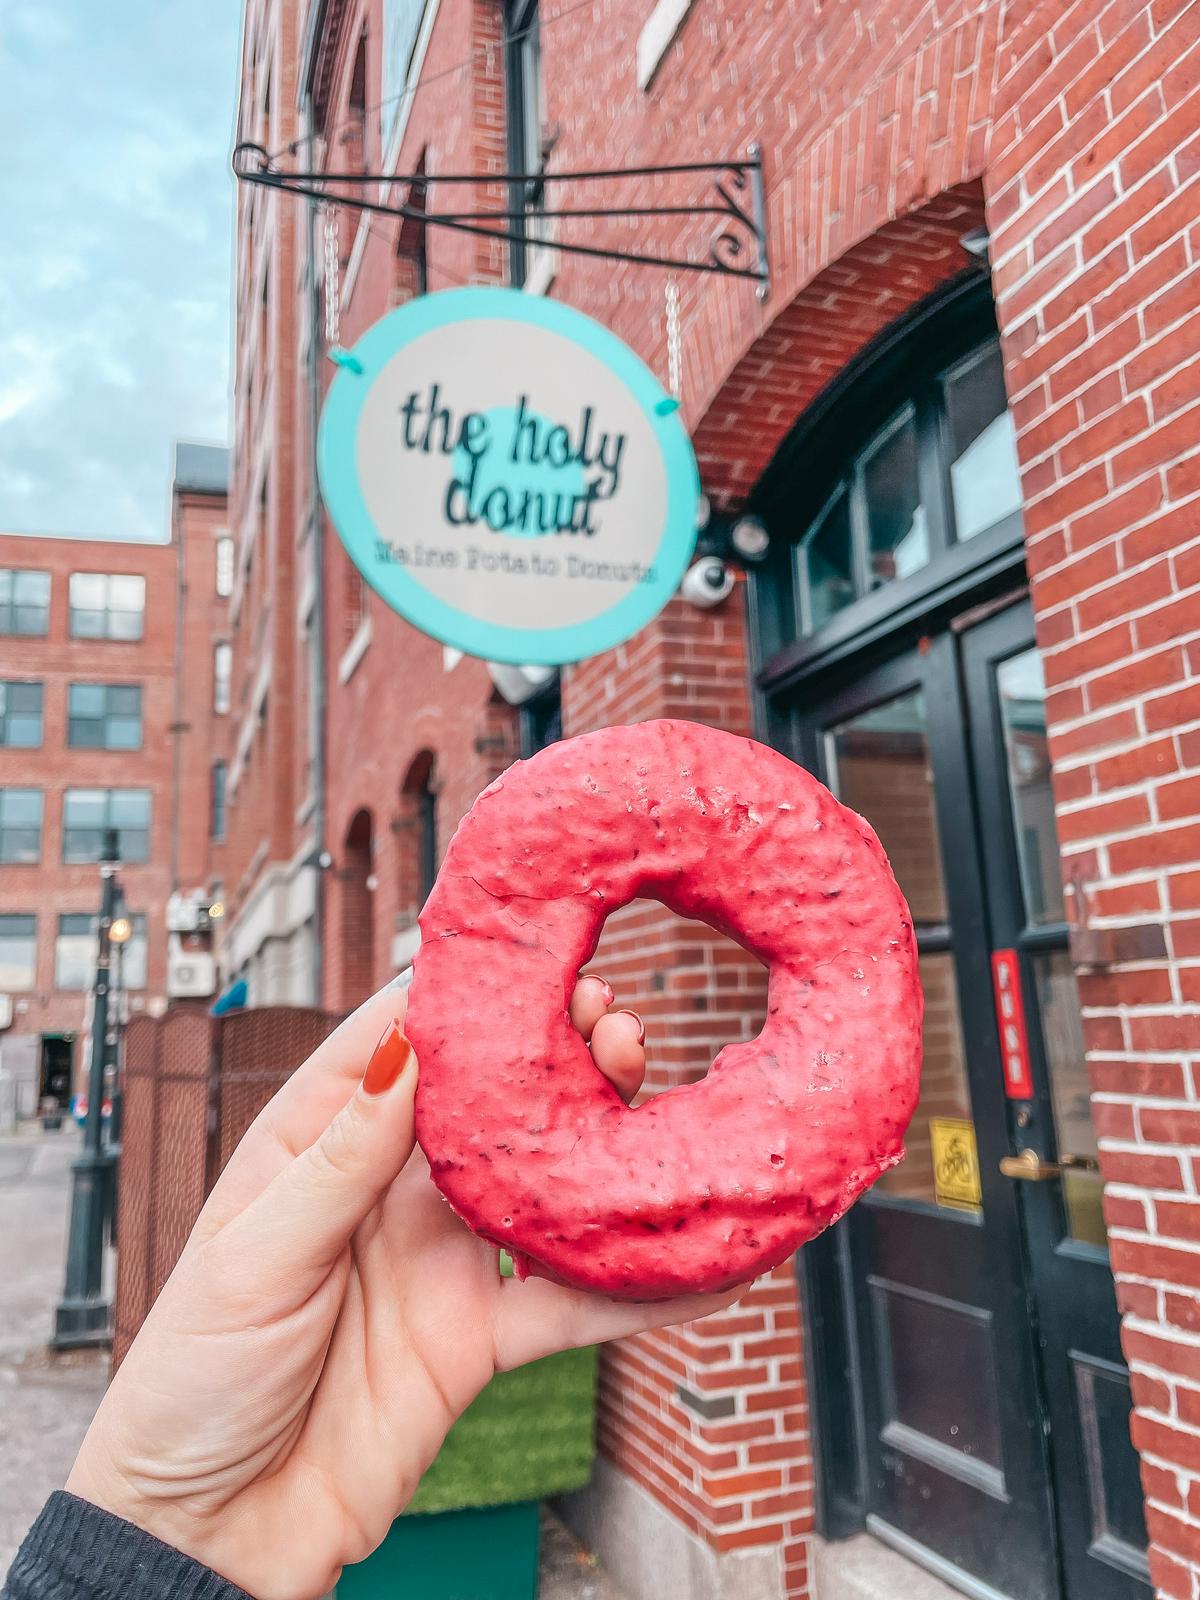 The Holy Donut in Portland Maine